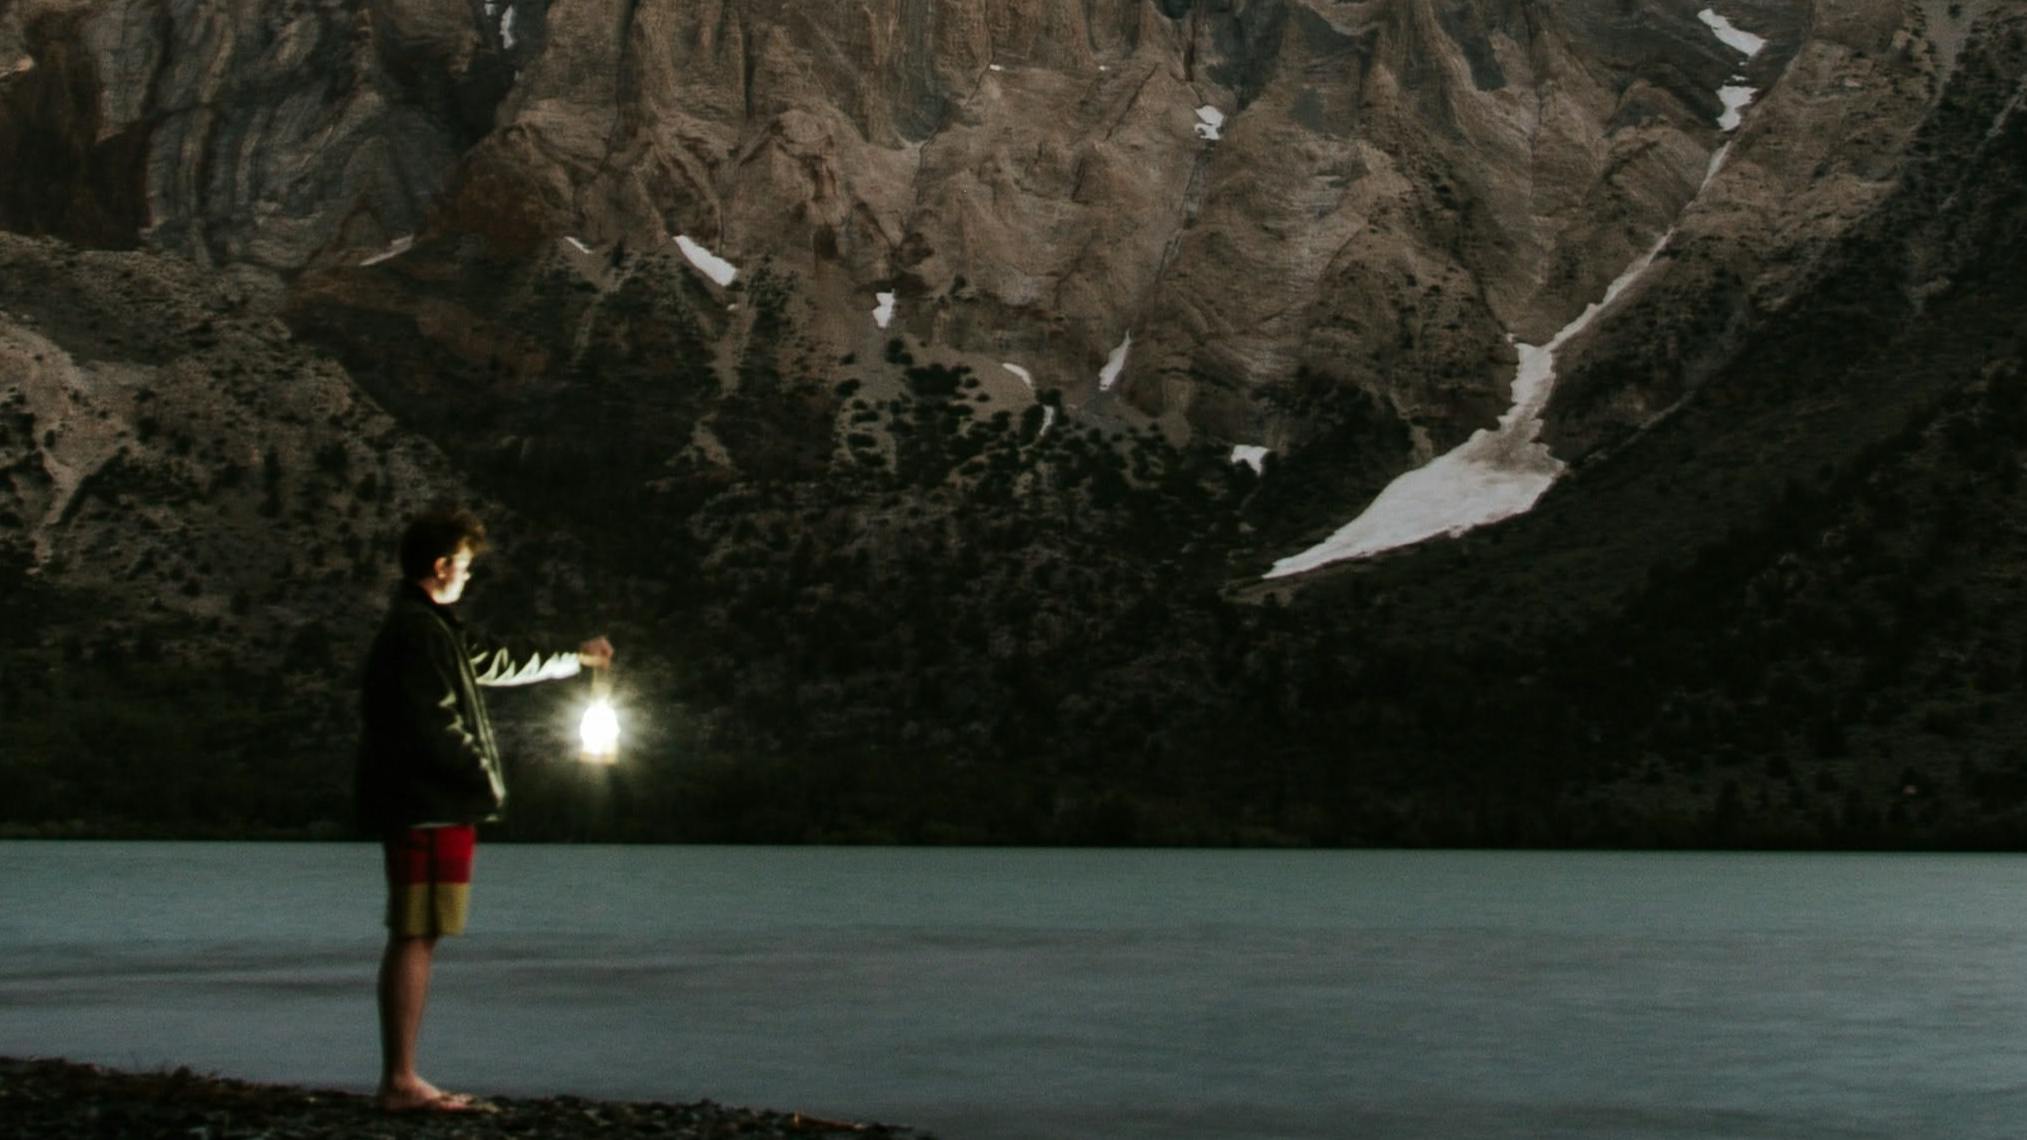 A person standing on the edge of a lake holding up a lantern. There is a mountain and a stream in the background and it is starting to get dark out. 